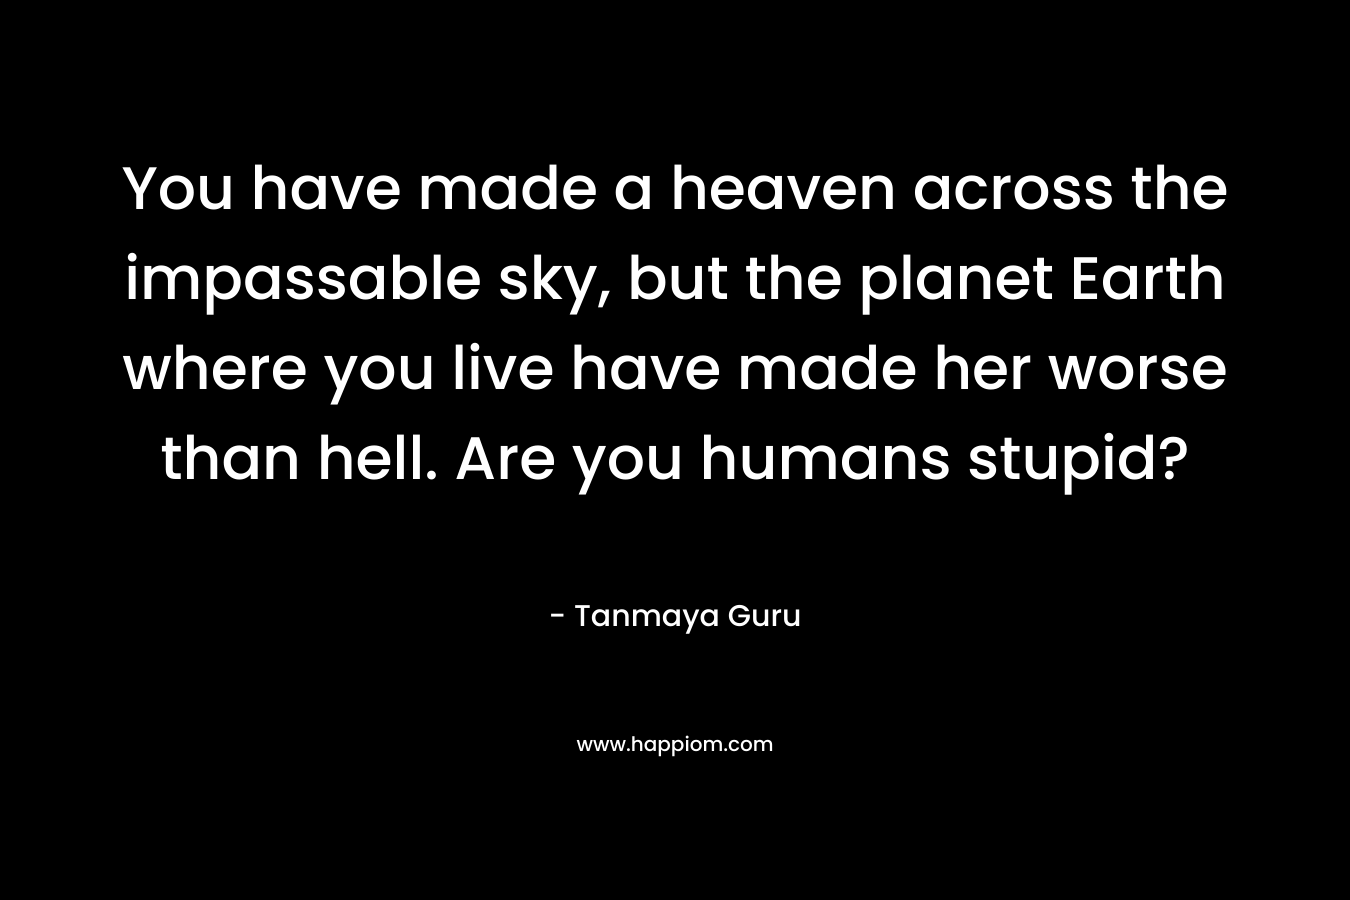 You have made a heaven across the impassable sky, but the planet Earth where you live have made her worse than hell. Are you humans stupid?